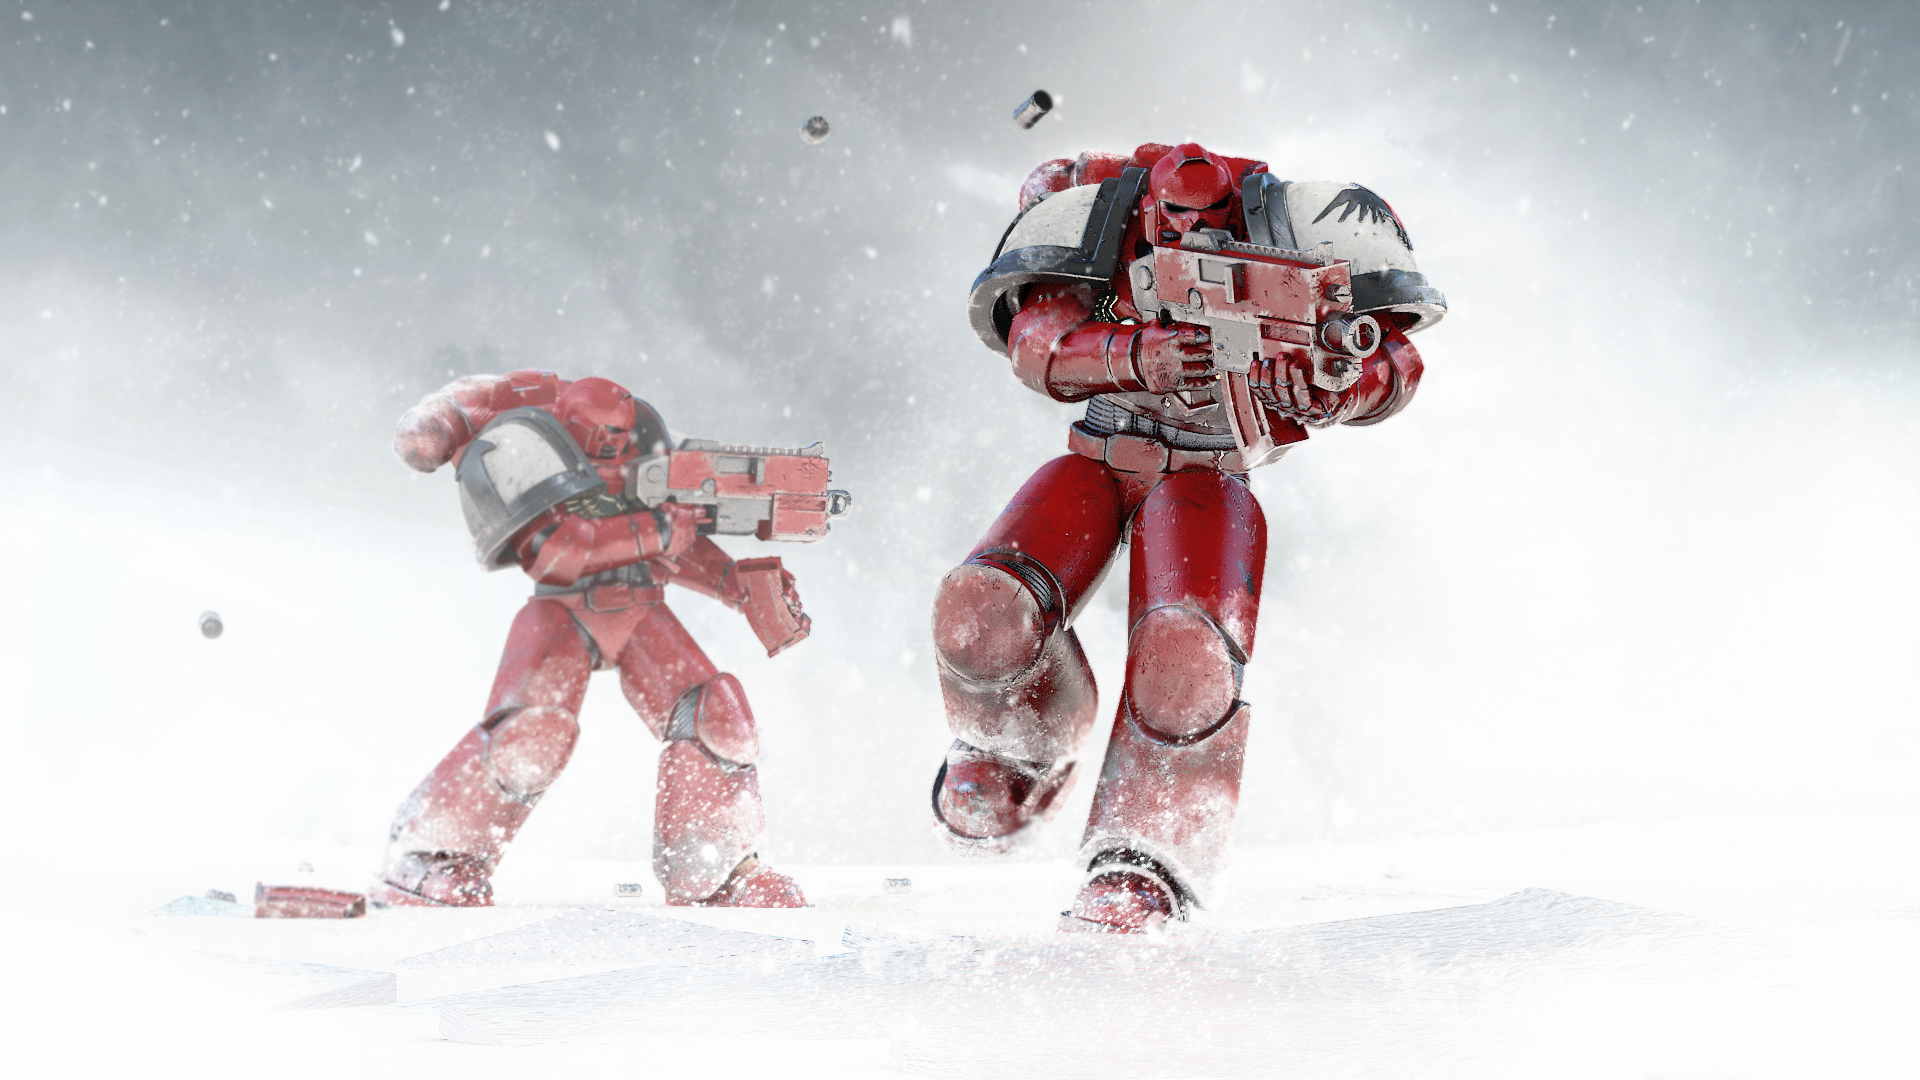 Two Space Marines in Power armour fight in the snow